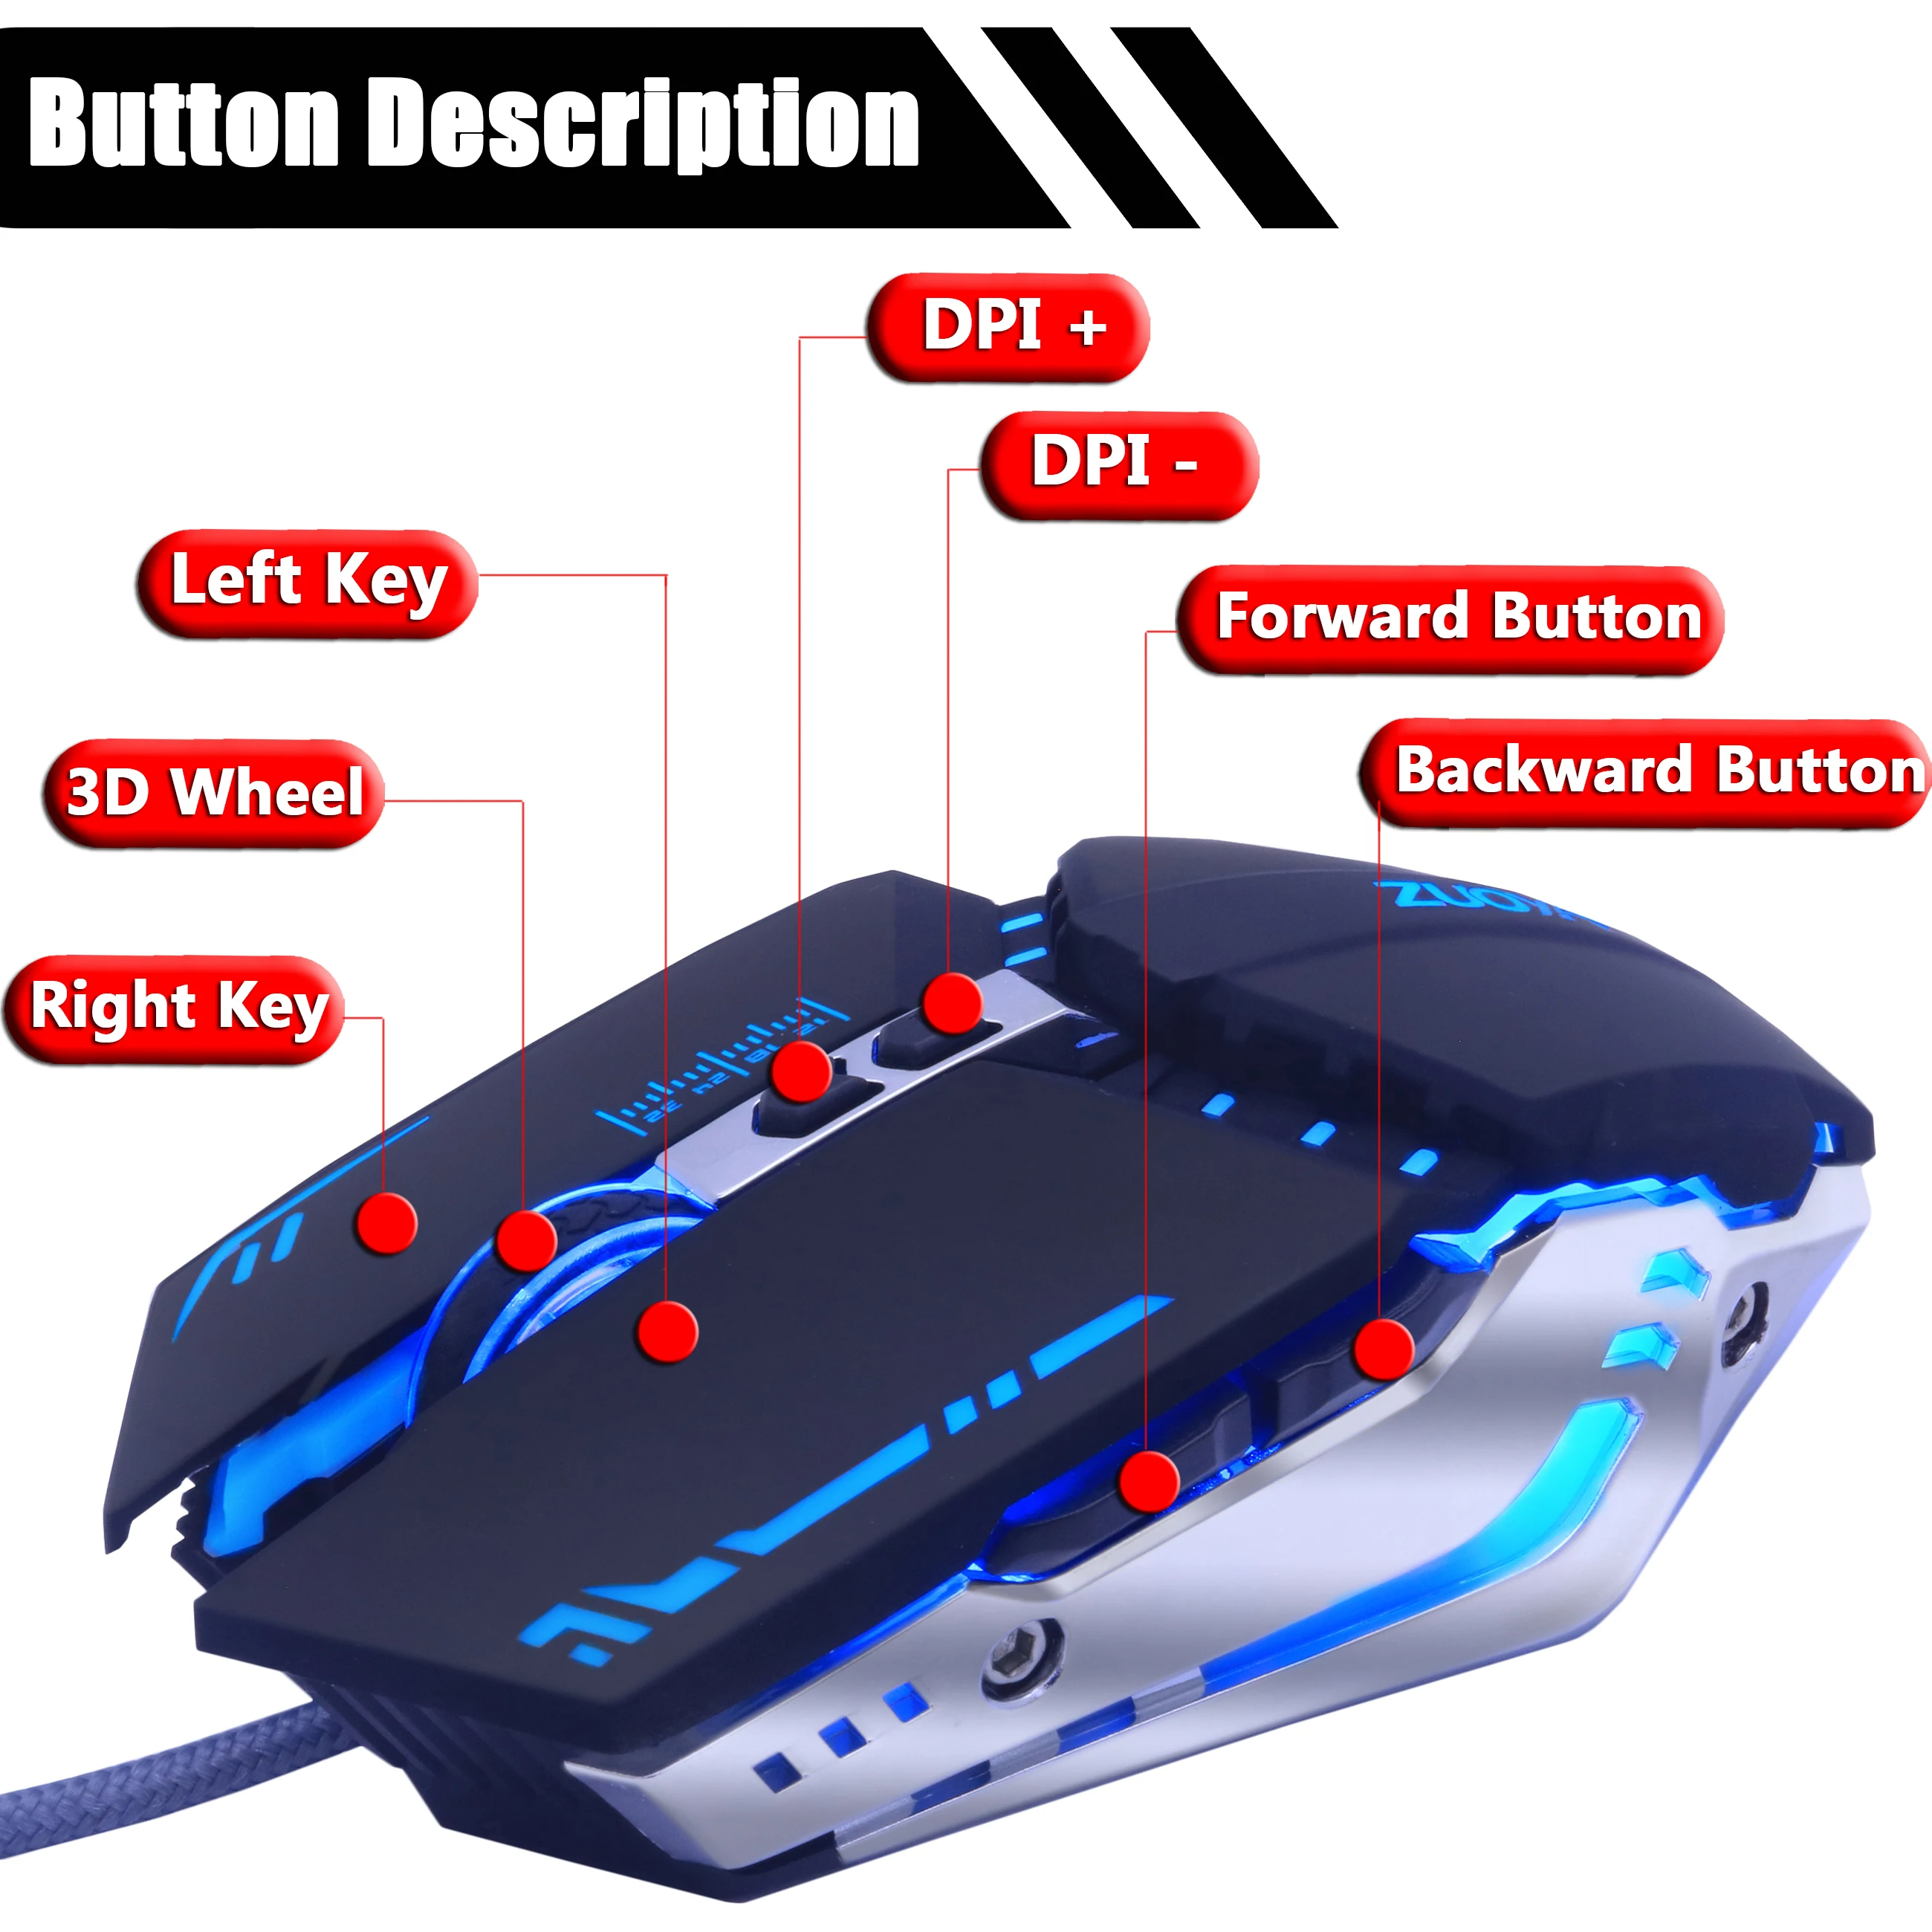 ZUOYA Gaming Mouse DPI Adjustable Wired Mouse USB Optical LED Computer Mice for Laptop PC Game Professional Gamer